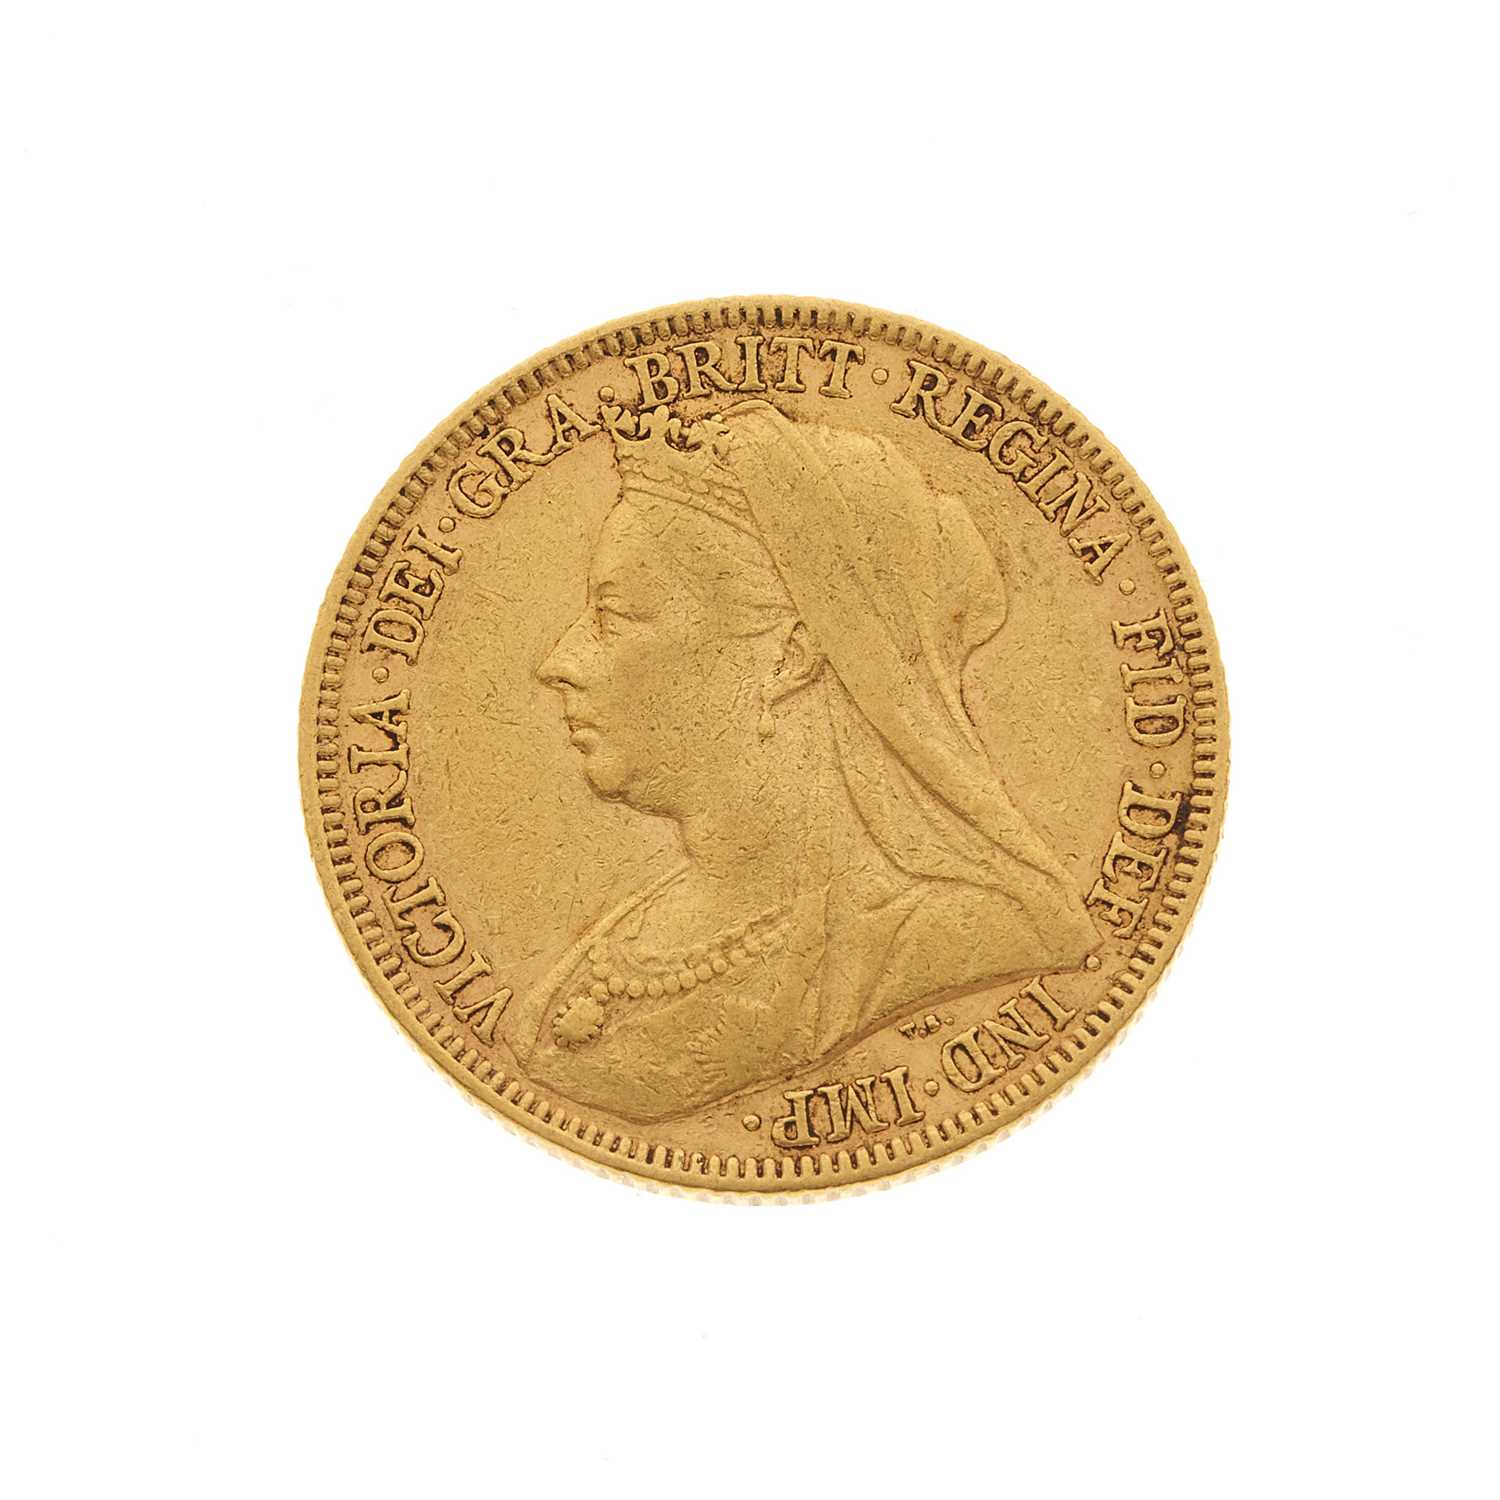 Lot 33 - Victoria, a gold full sovereign coin dated 1897